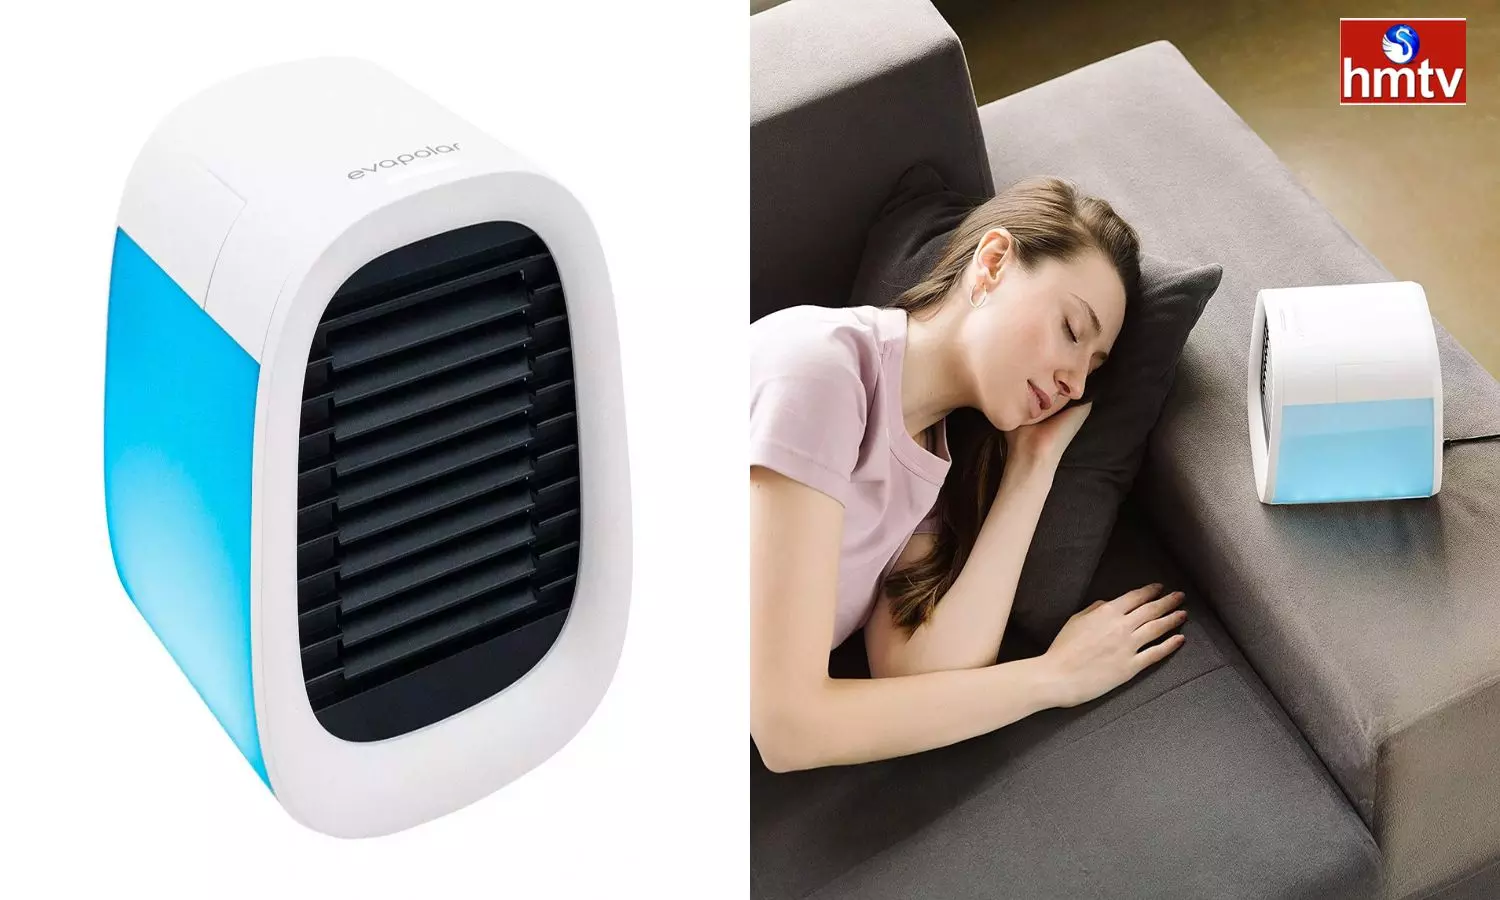 Evapolar evaCHILL Portable Air Conditioners for Bedroom, Office, Car, Camping Check this Mini AC price and features